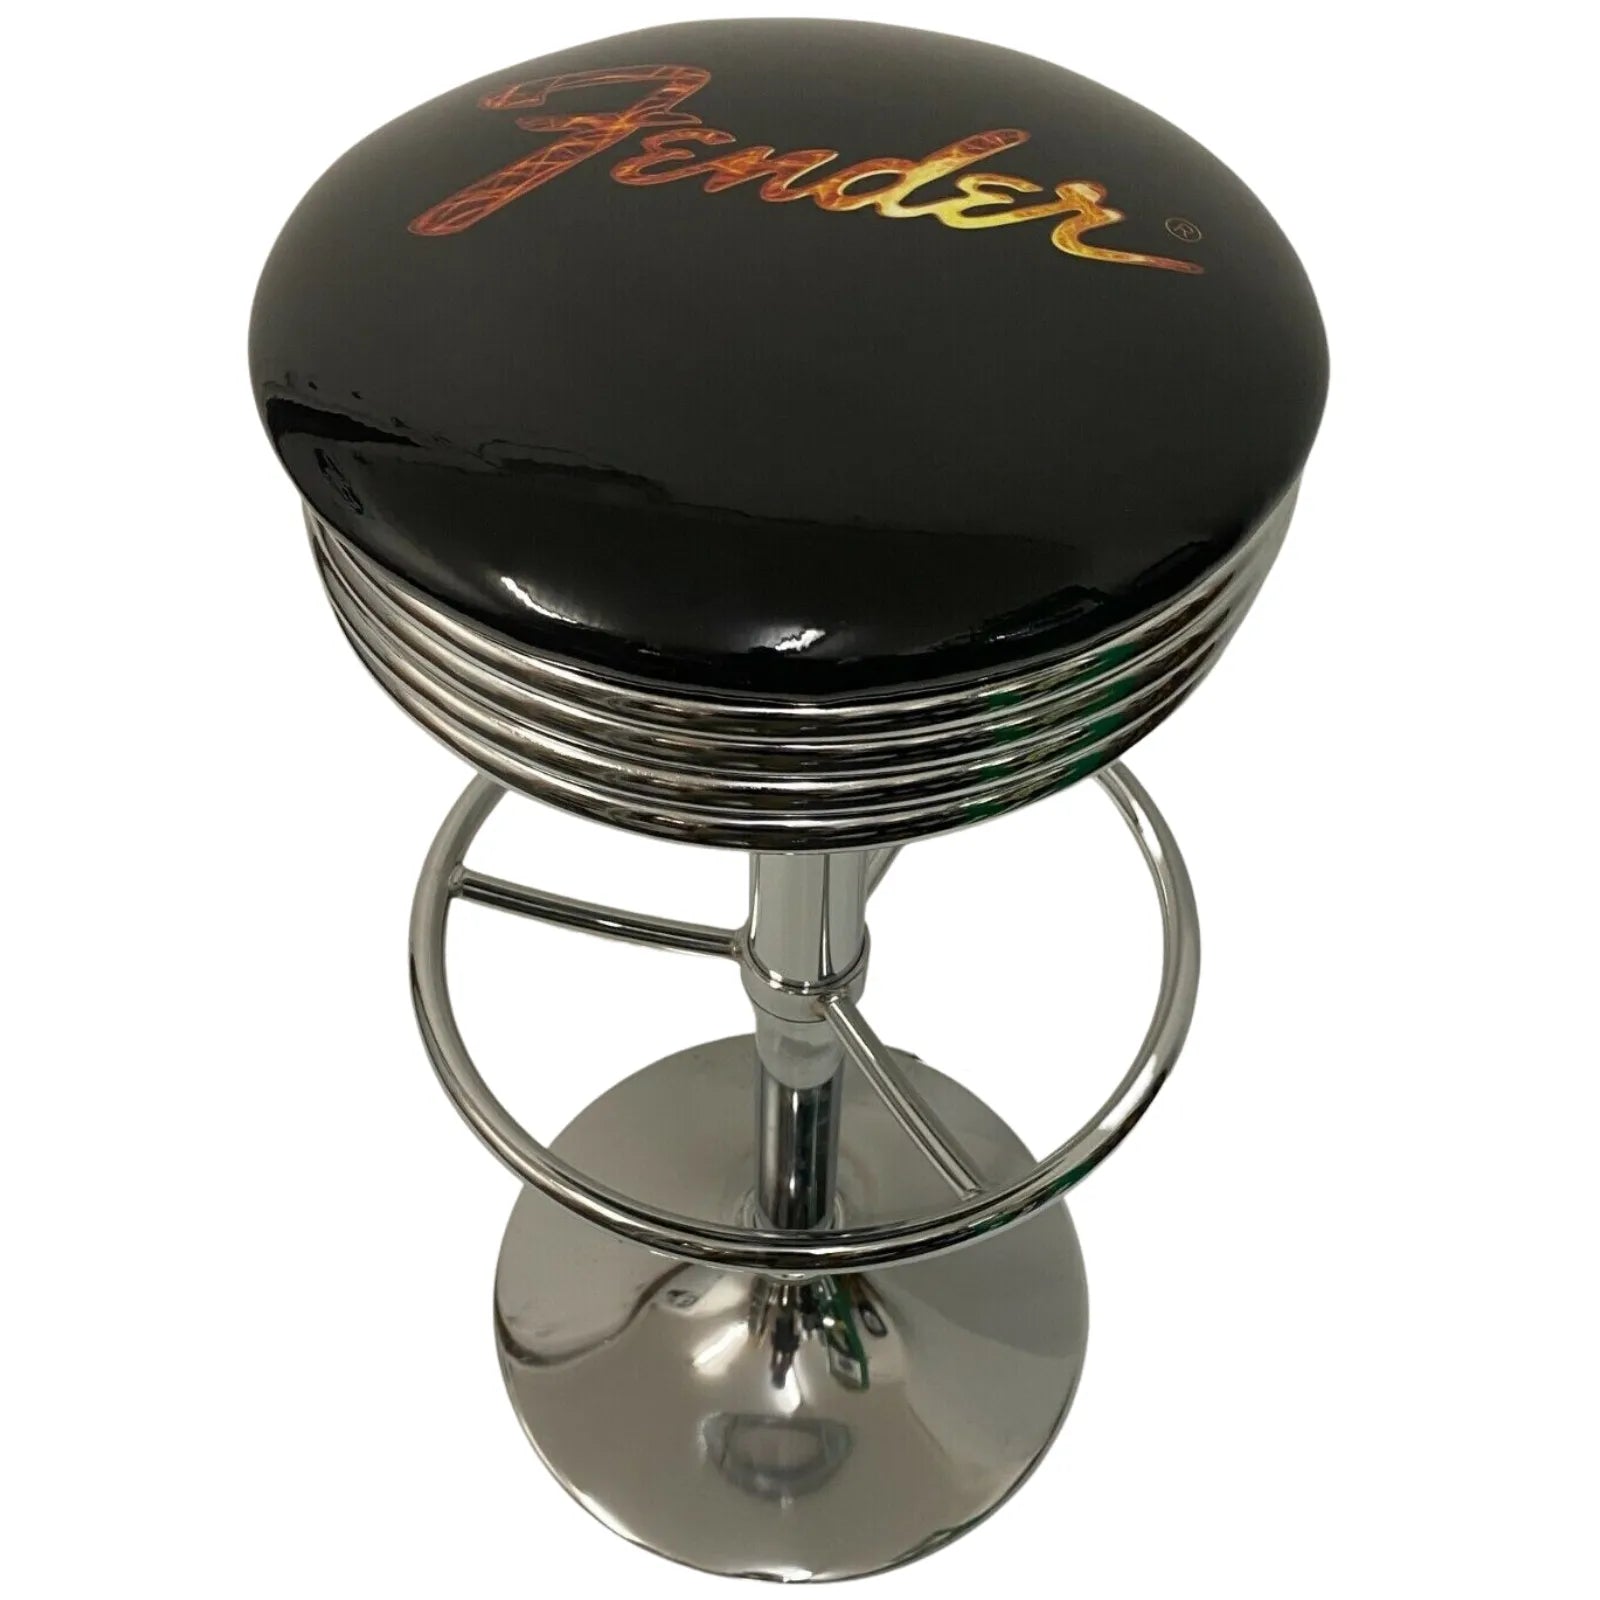 Fender Stainless Steel Gas-Lift Adjustable Bar Stool - KING CAVE